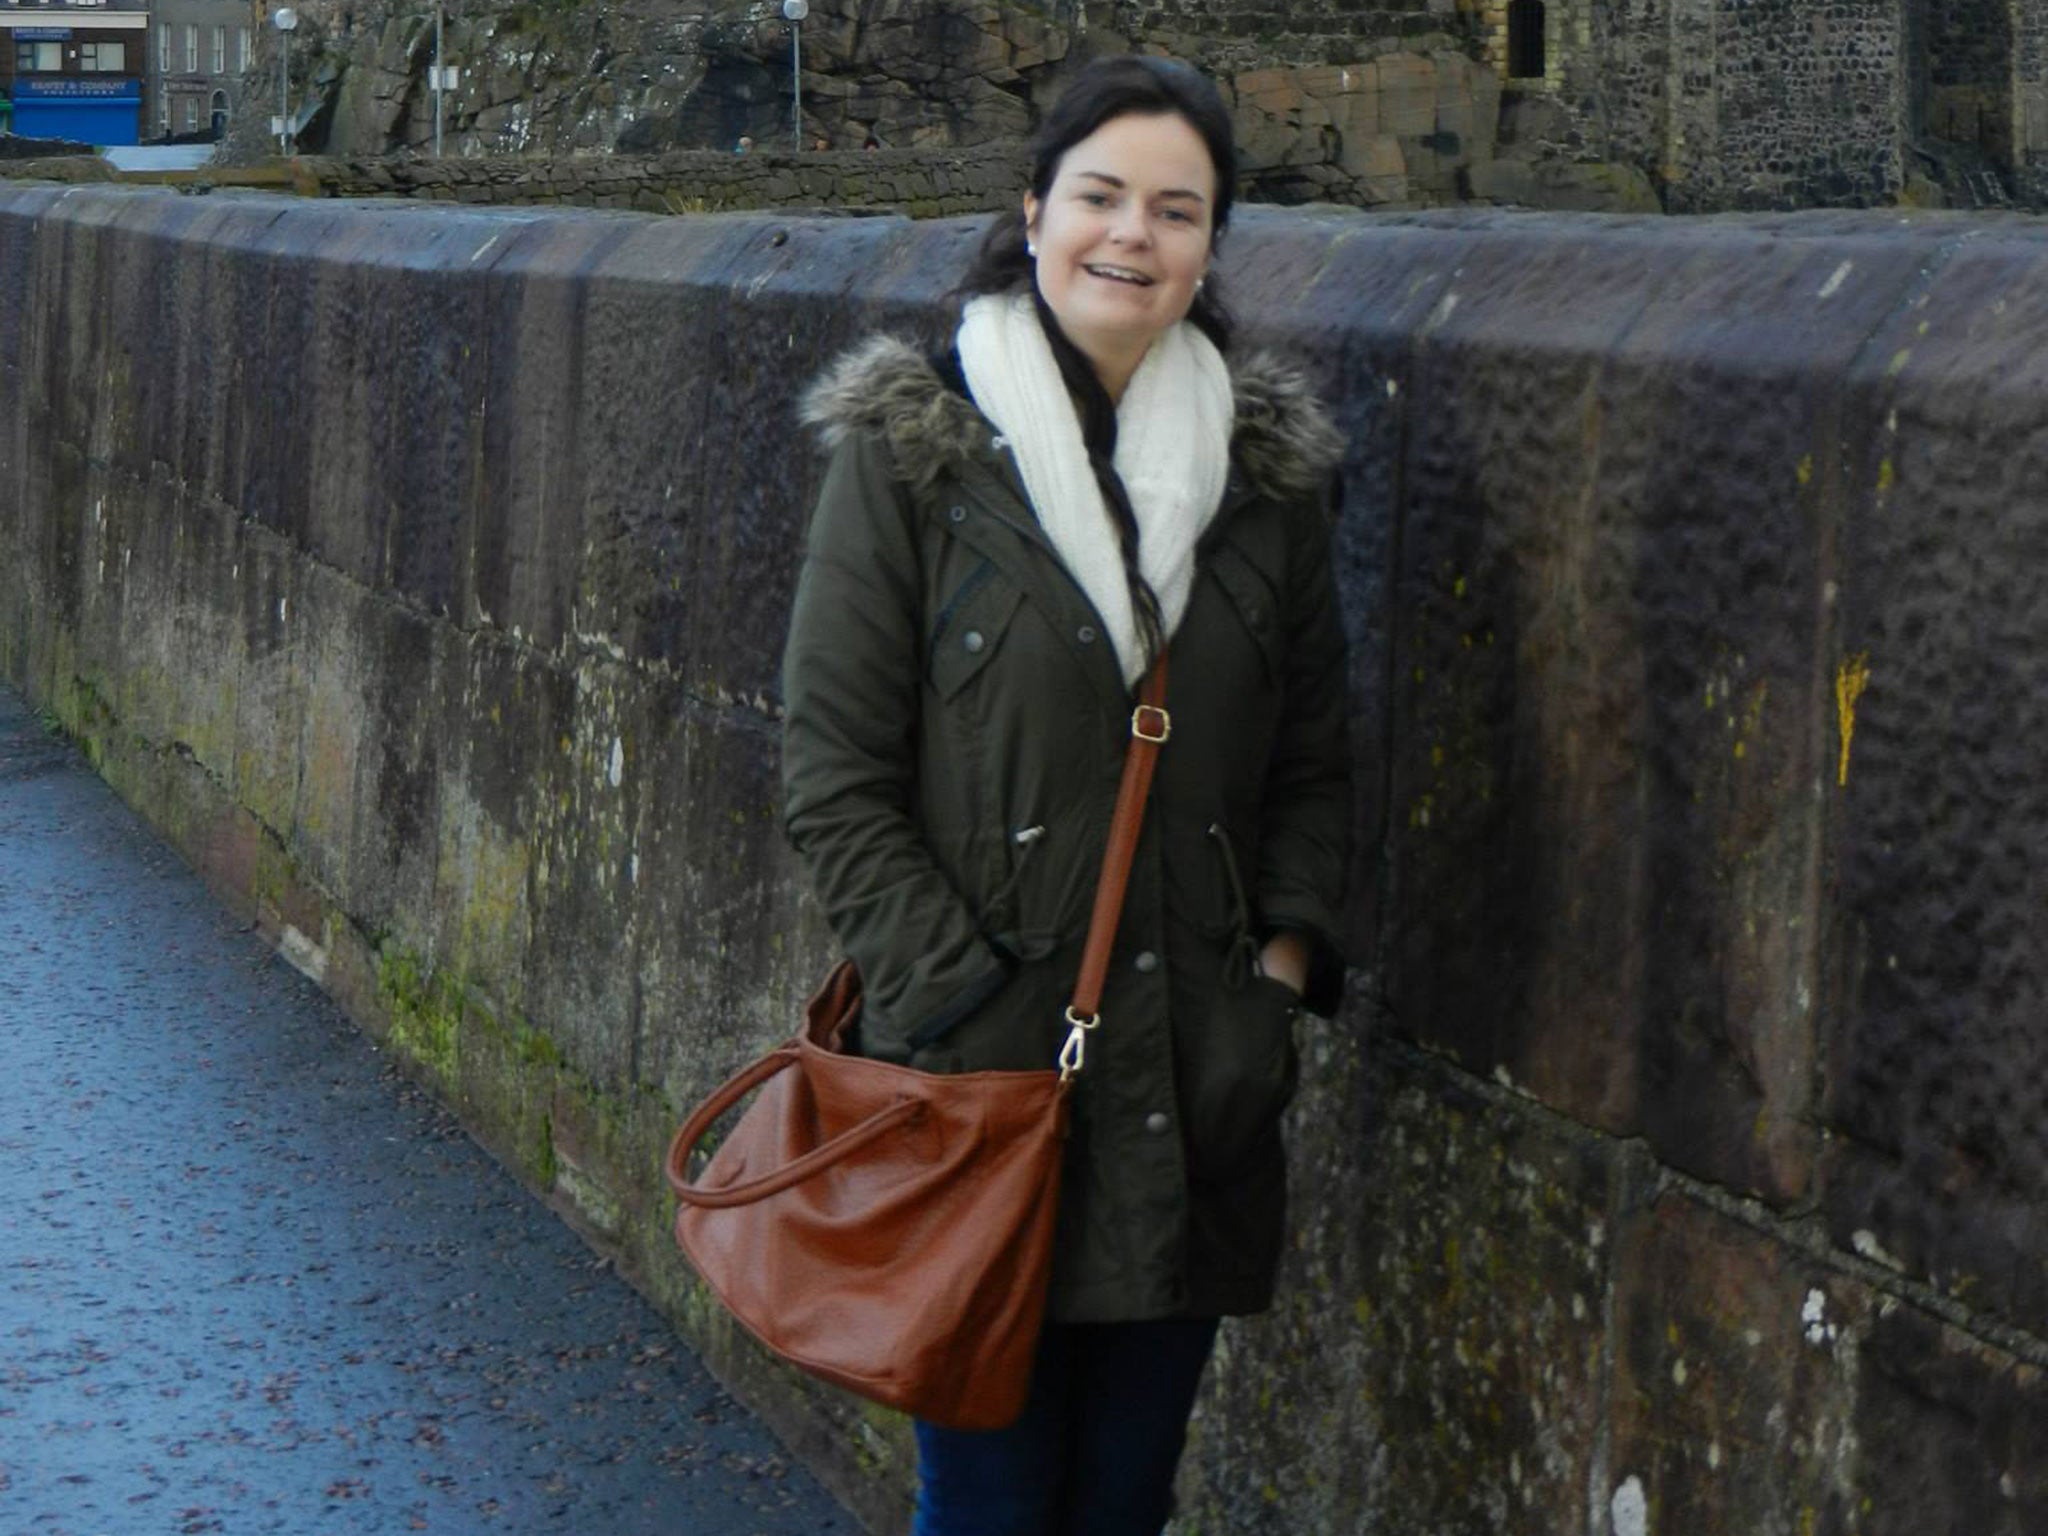 Karen Buckley, 24, went missing in Glasgow in the early hours of Sunday 12 April